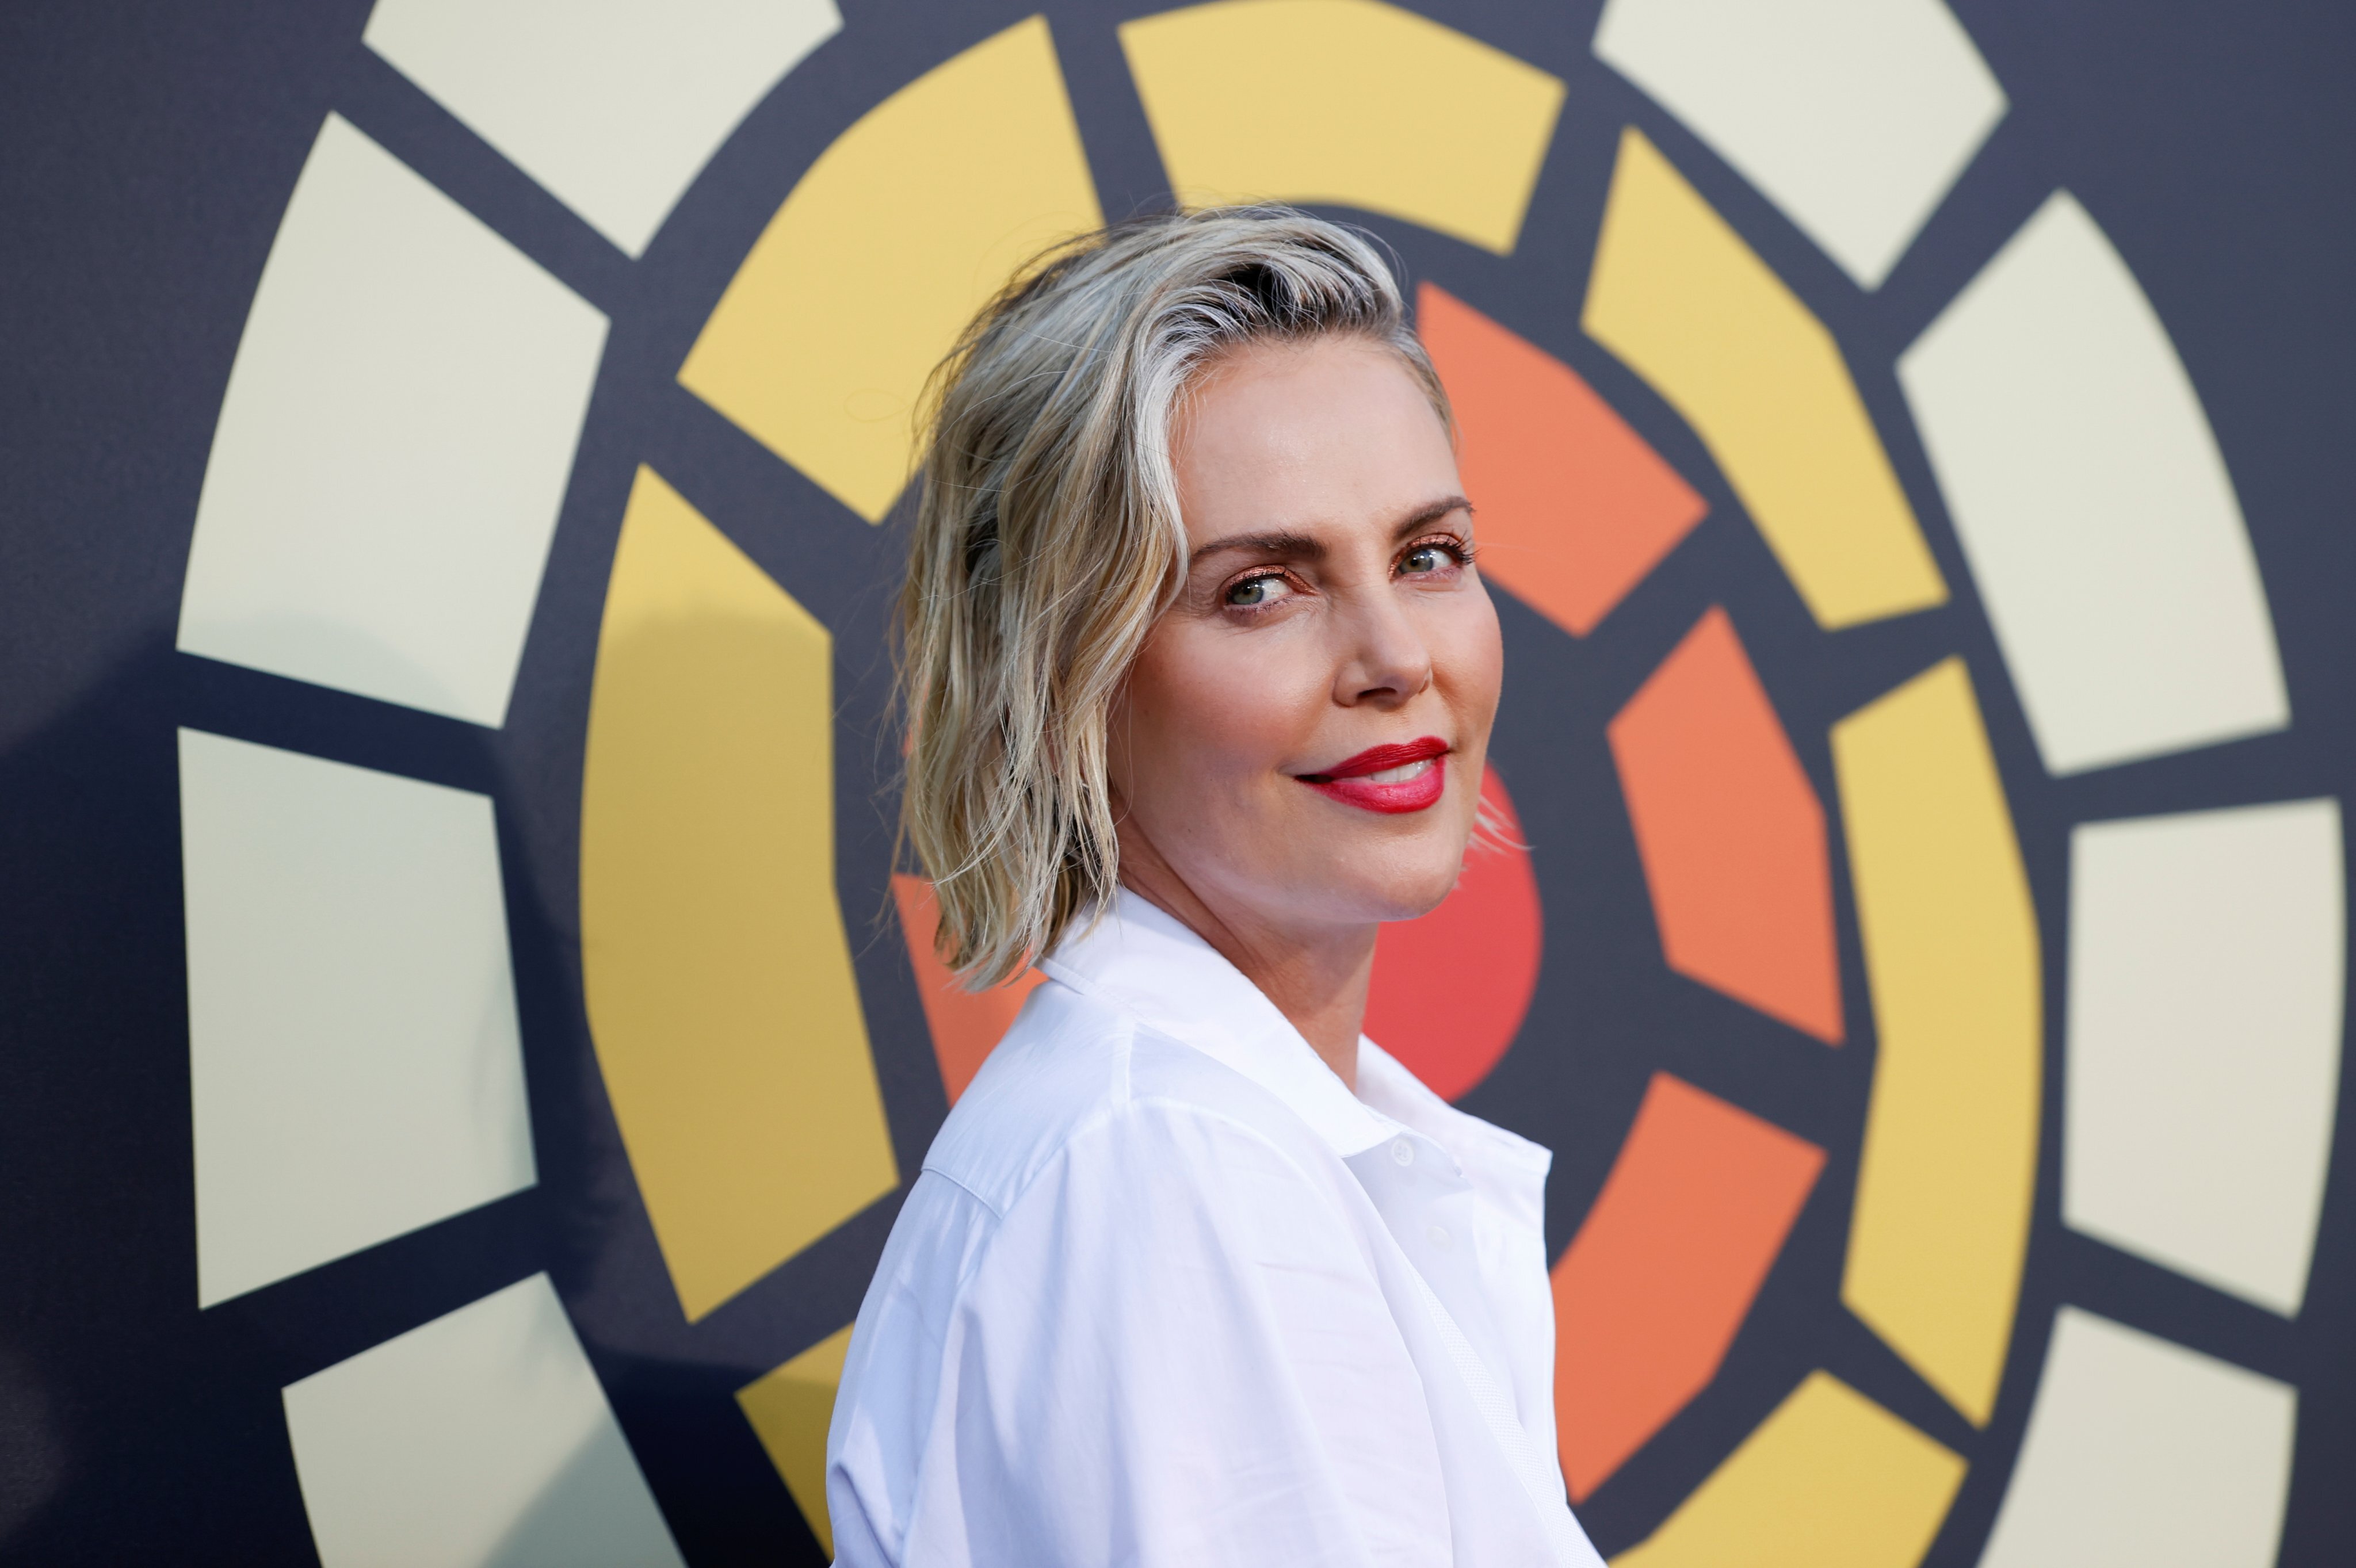 South African-American actress Charlize Theron, award-winning star of Mad Max: Fury Road and the Fast & Furious franchise. Photo: Reuters